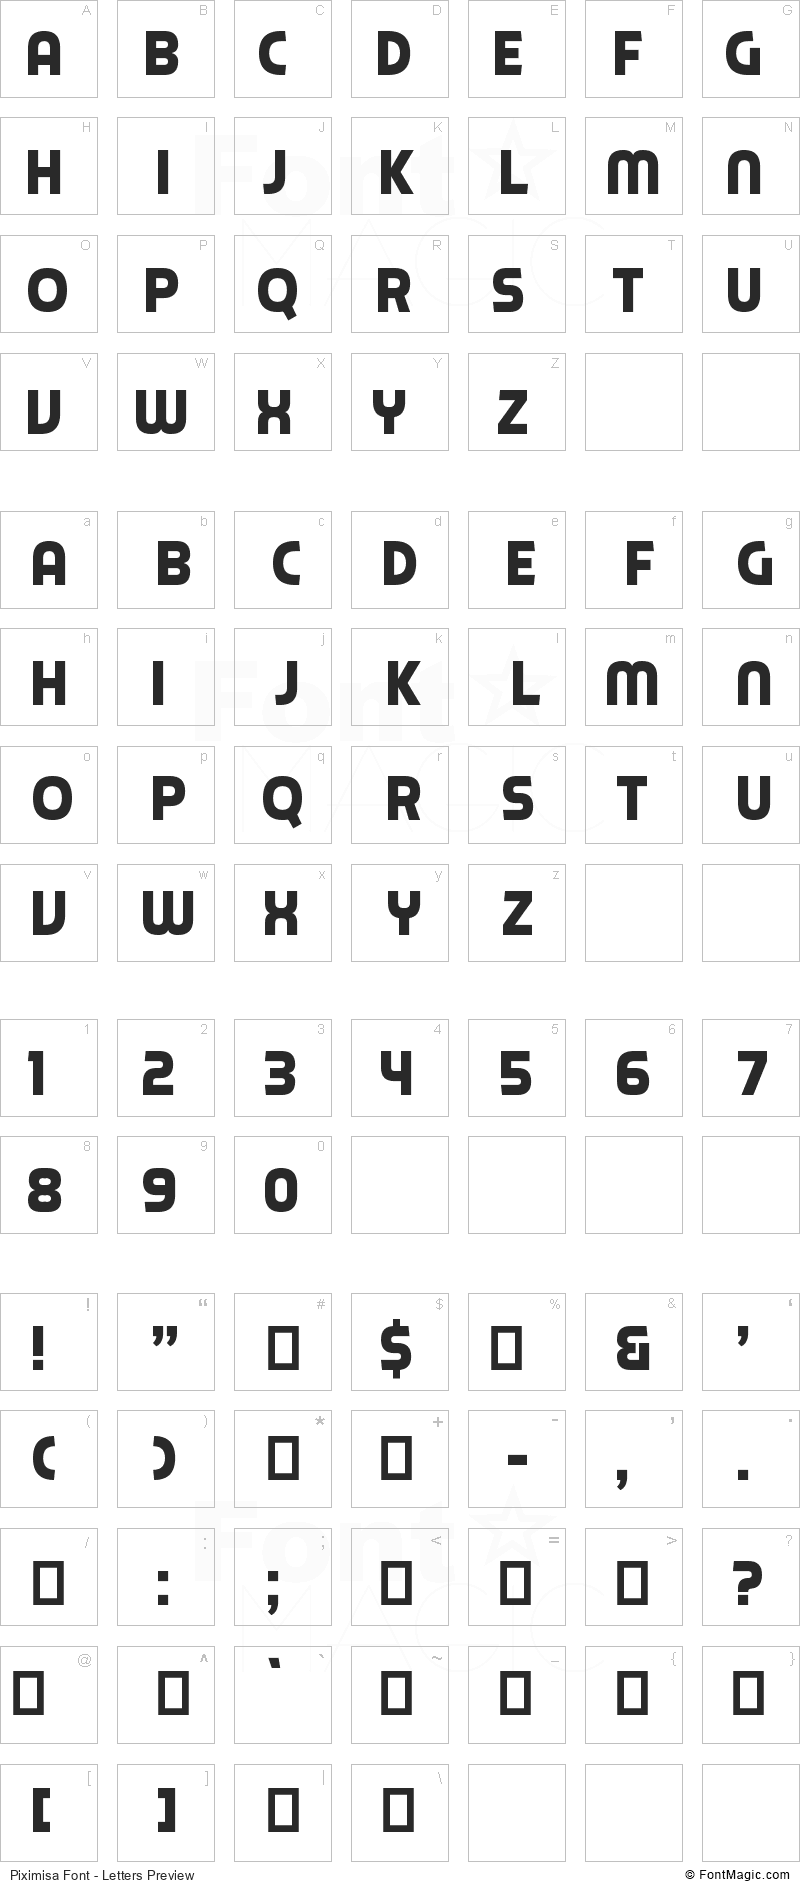 Piximisa Font - All Latters Preview Chart